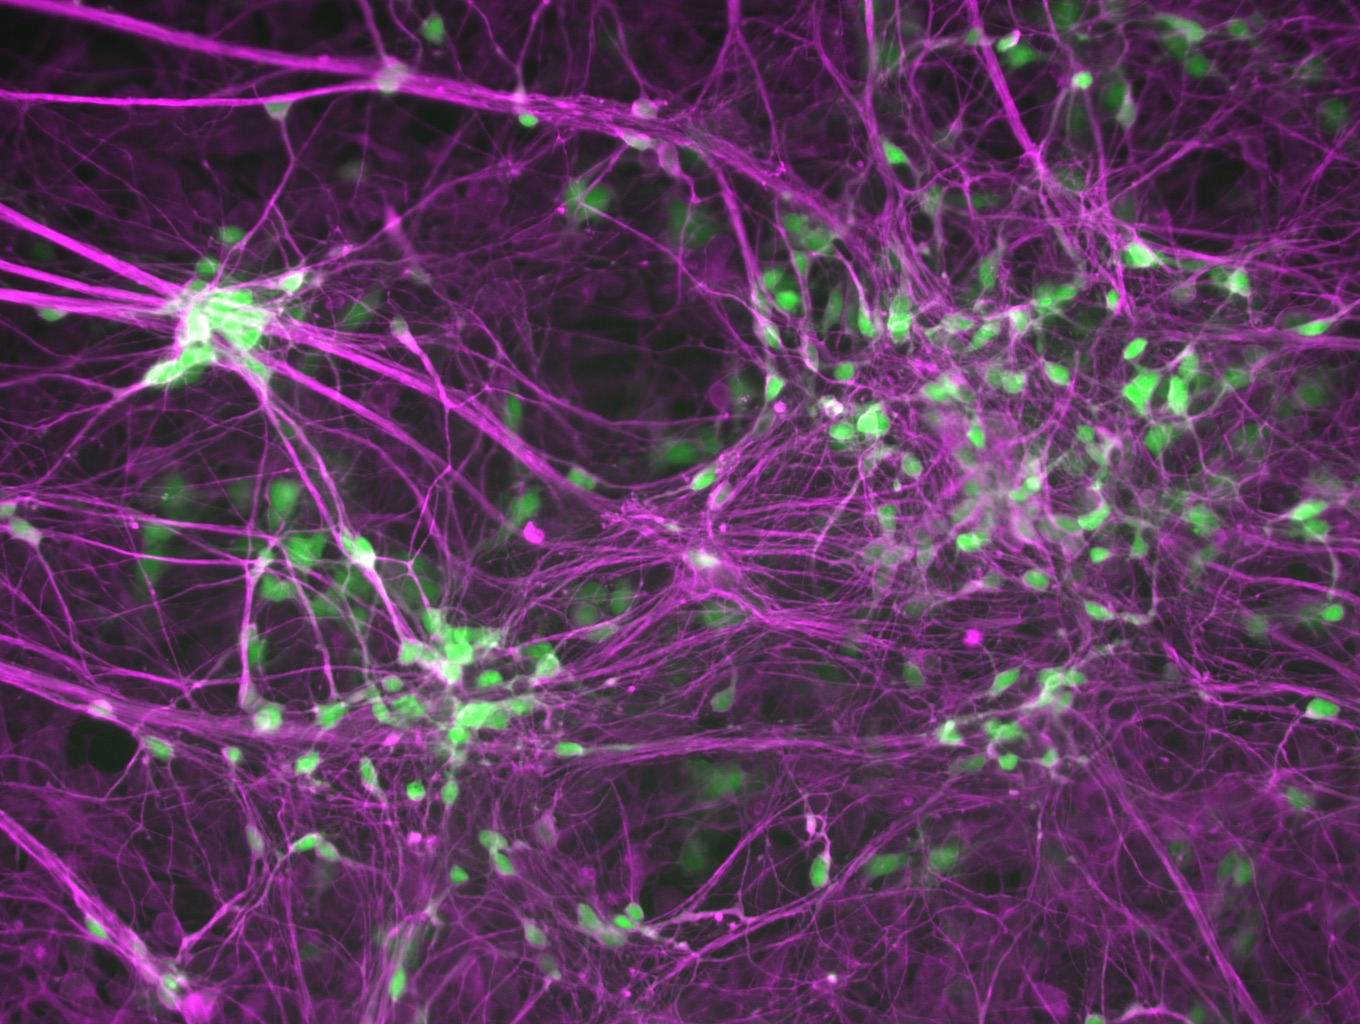 Human induced motor neurons that are labeled with a motor neuron marker HB9 in green and a neuron marker TUJ1 in purple.

CREDIT
Ichida Lab